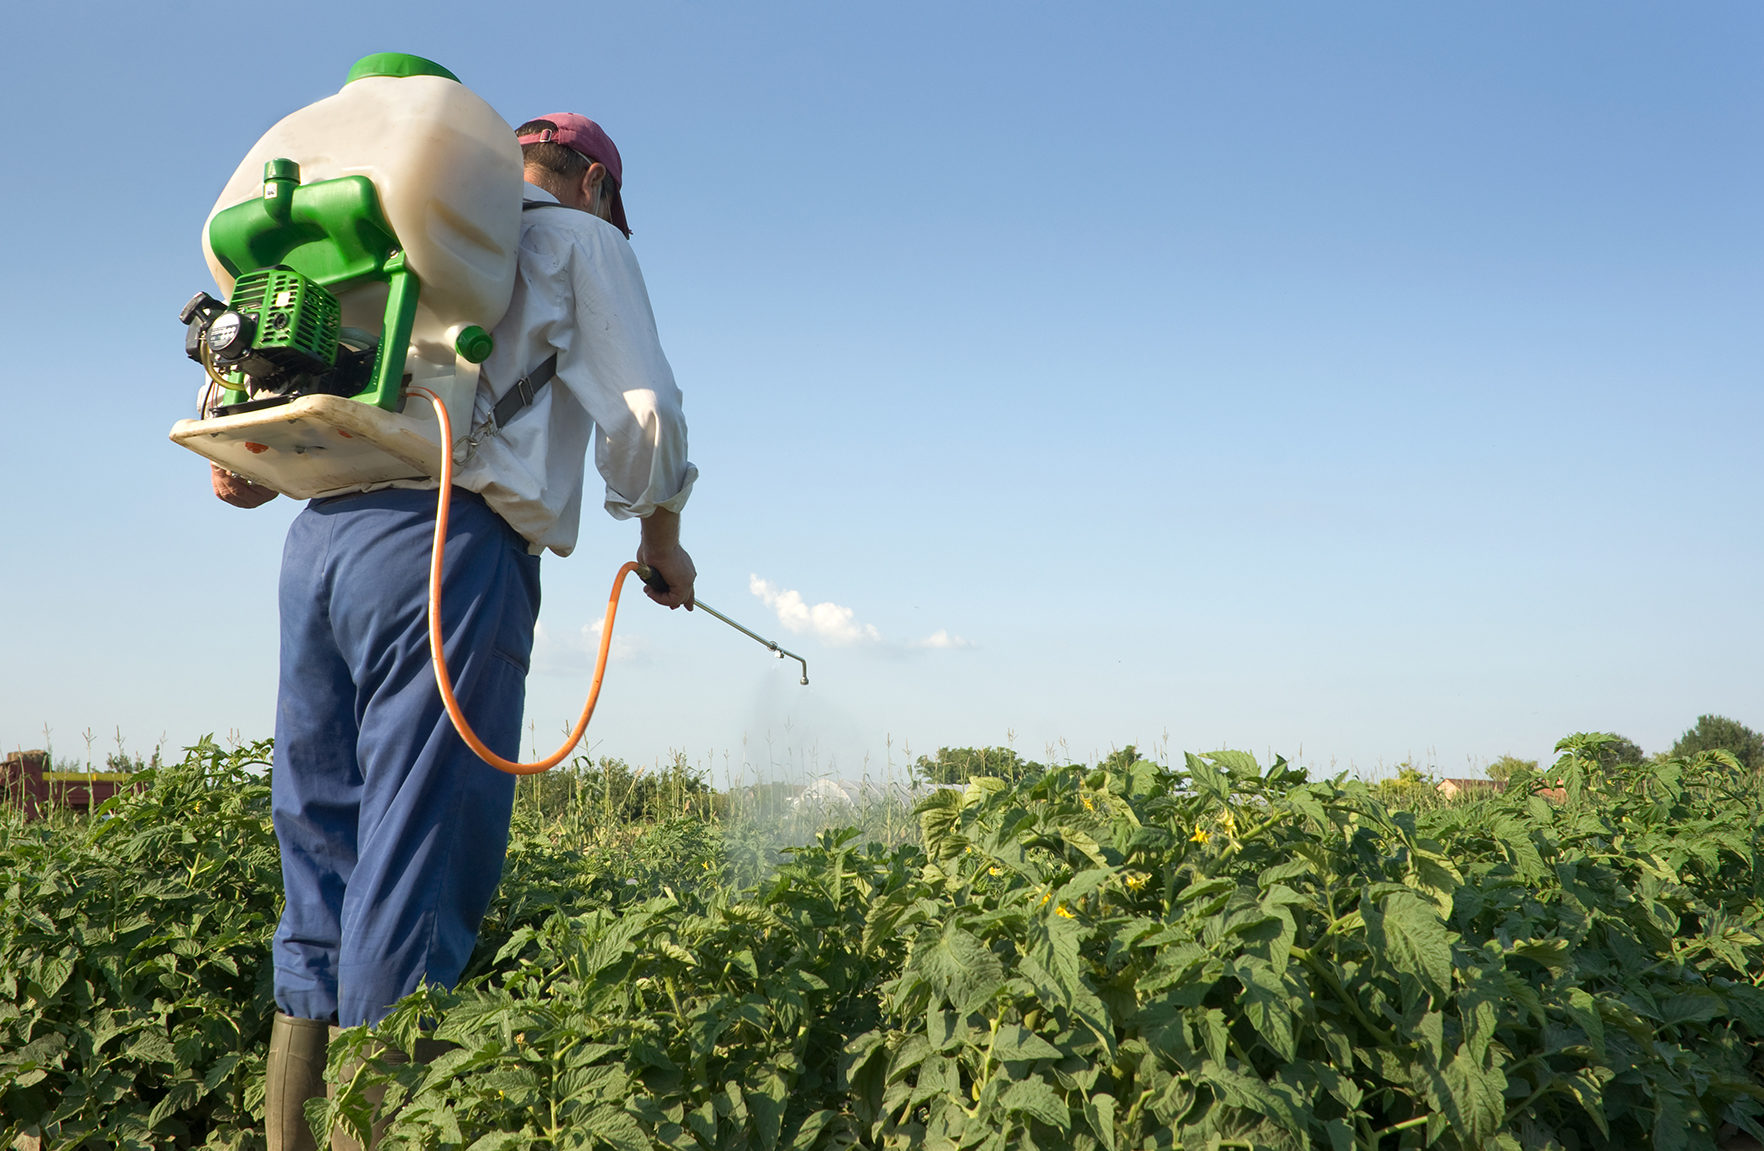 man spraying crops with herbicide